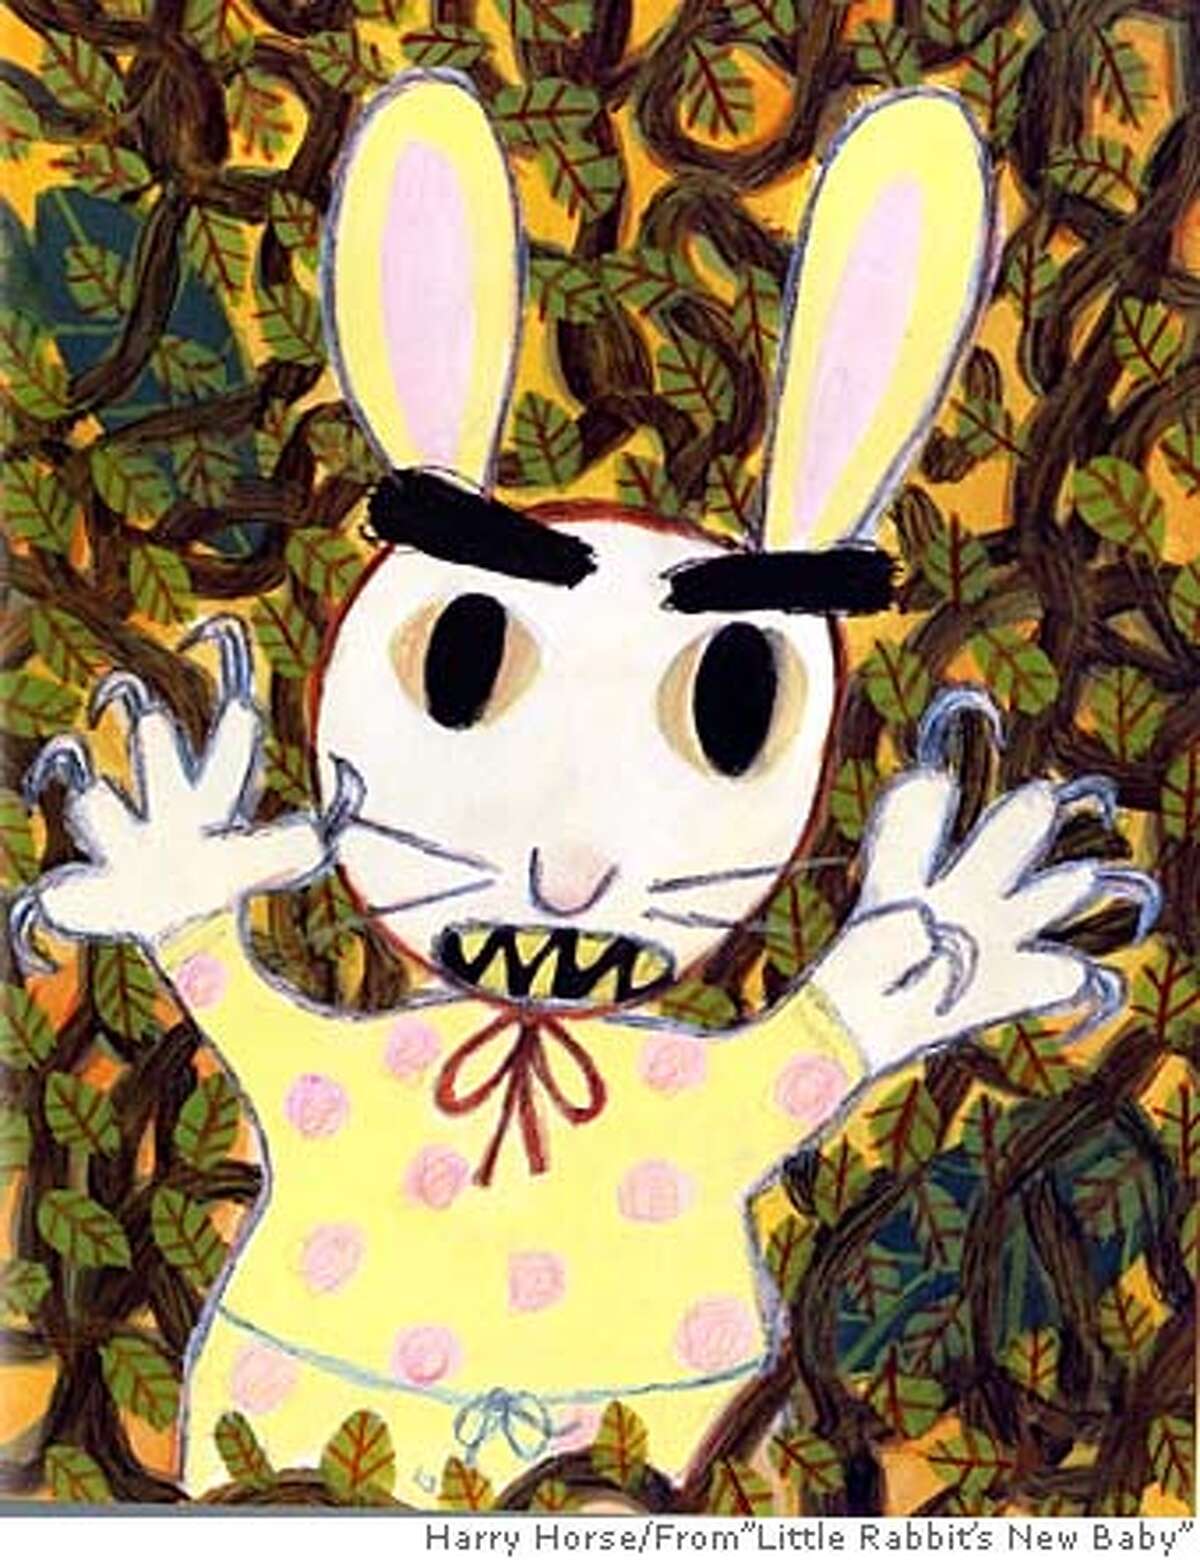 Funny Bunnies by Laurie Frankel